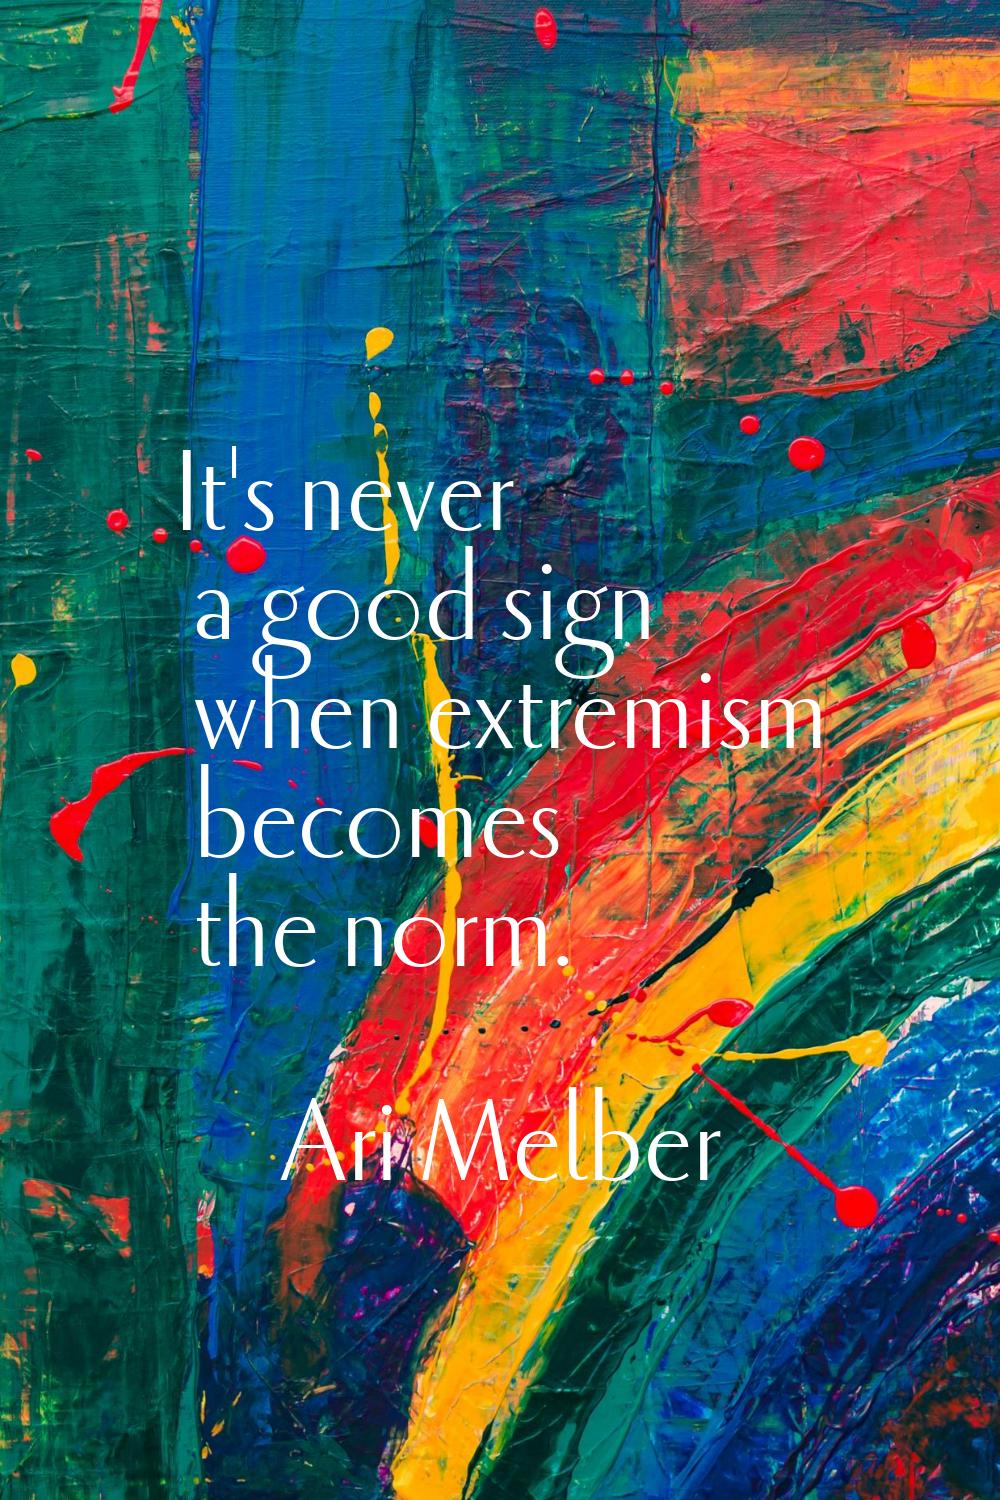 It's never a good sign when extremism becomes the norm.